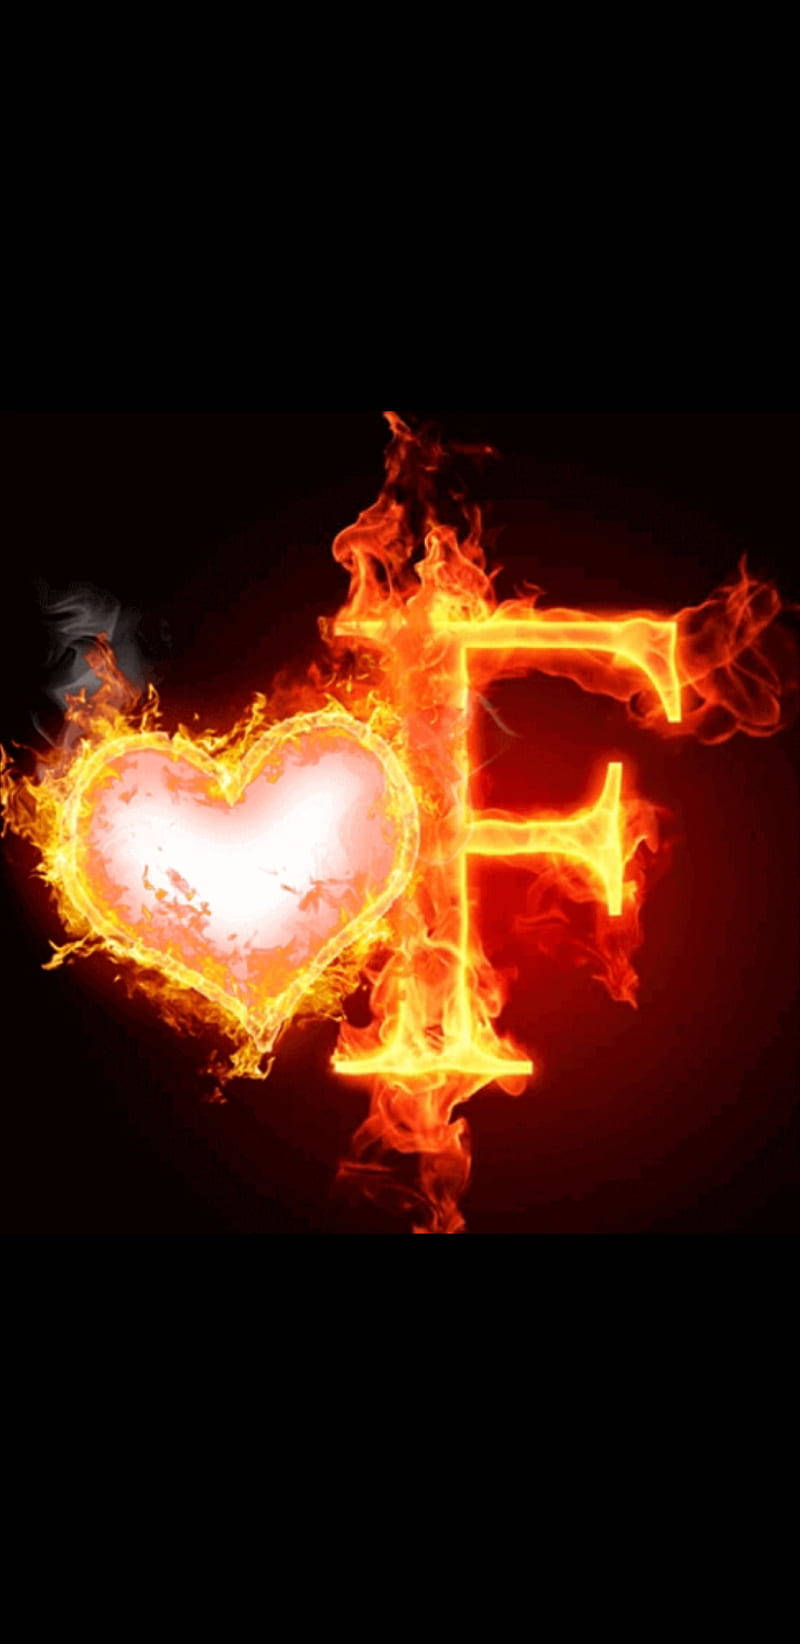 Letter F And Heart On Fire